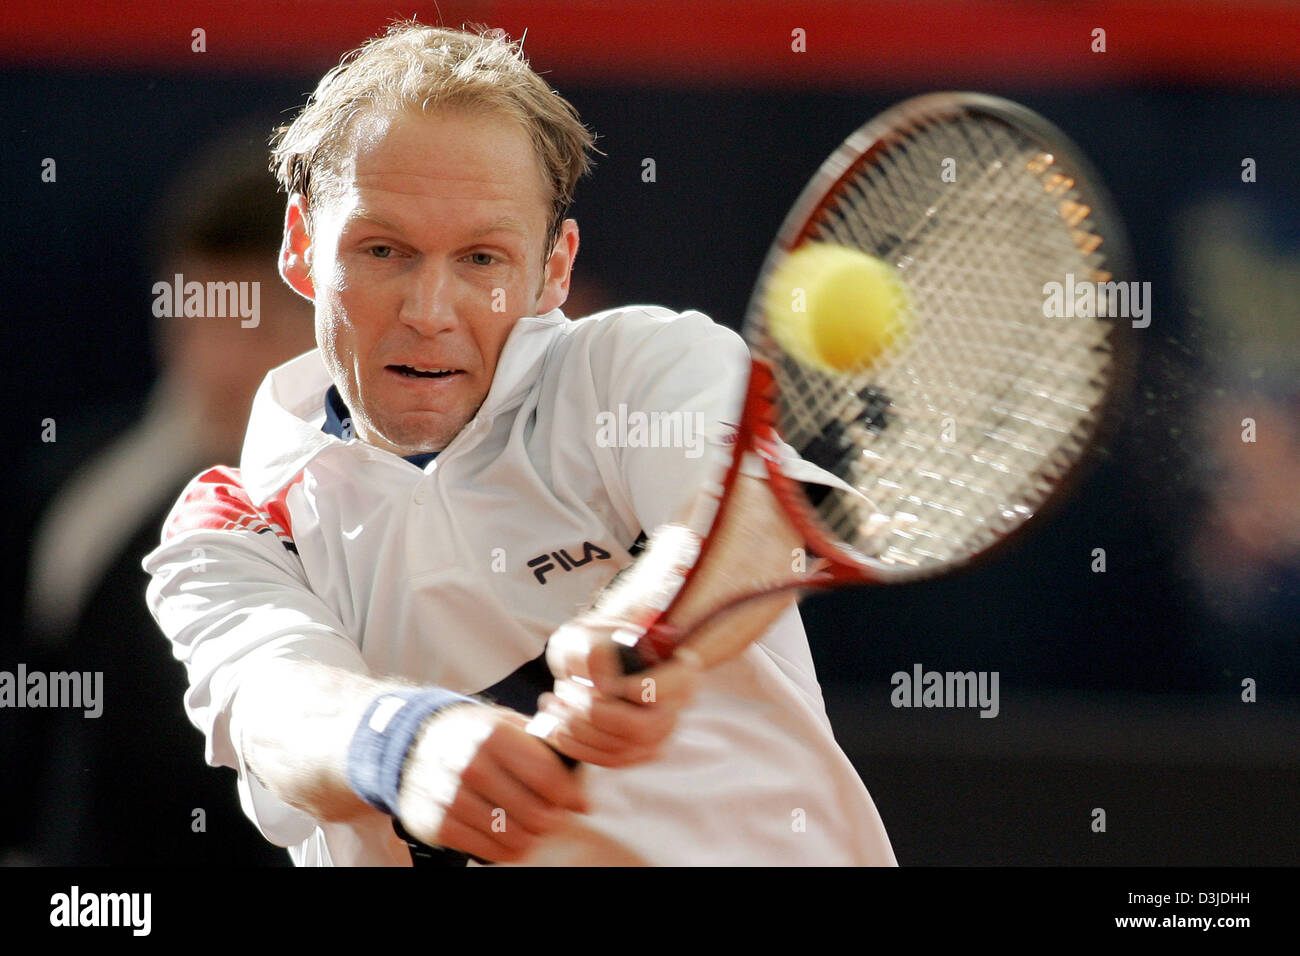 (dpa) - German tennis pro Rainer Schuettler plays a backhand during his match against Italian Andrea Seppi at the ATP Masters in Hamburg, Germany, 10 May 2005. Stock Photo